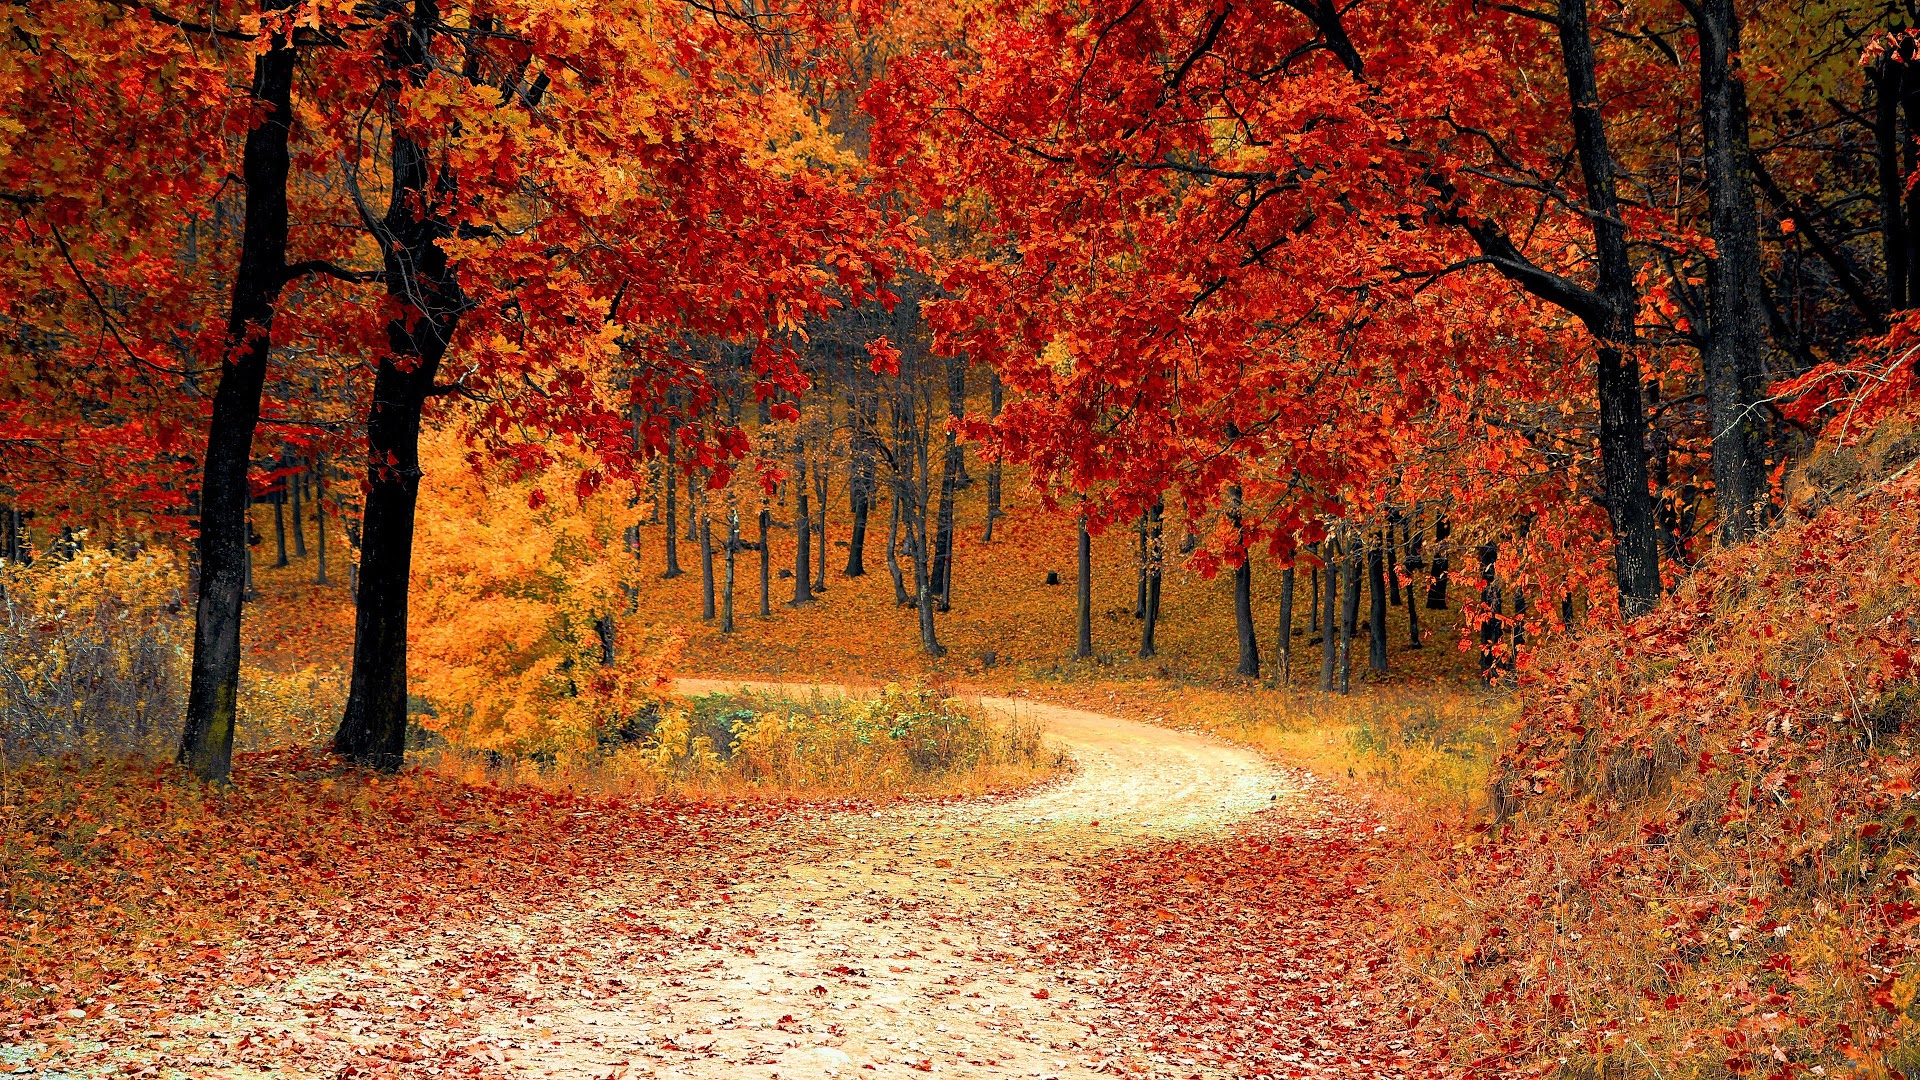 General 1920x1080 nature landscape trees forest fall leaves dirt road